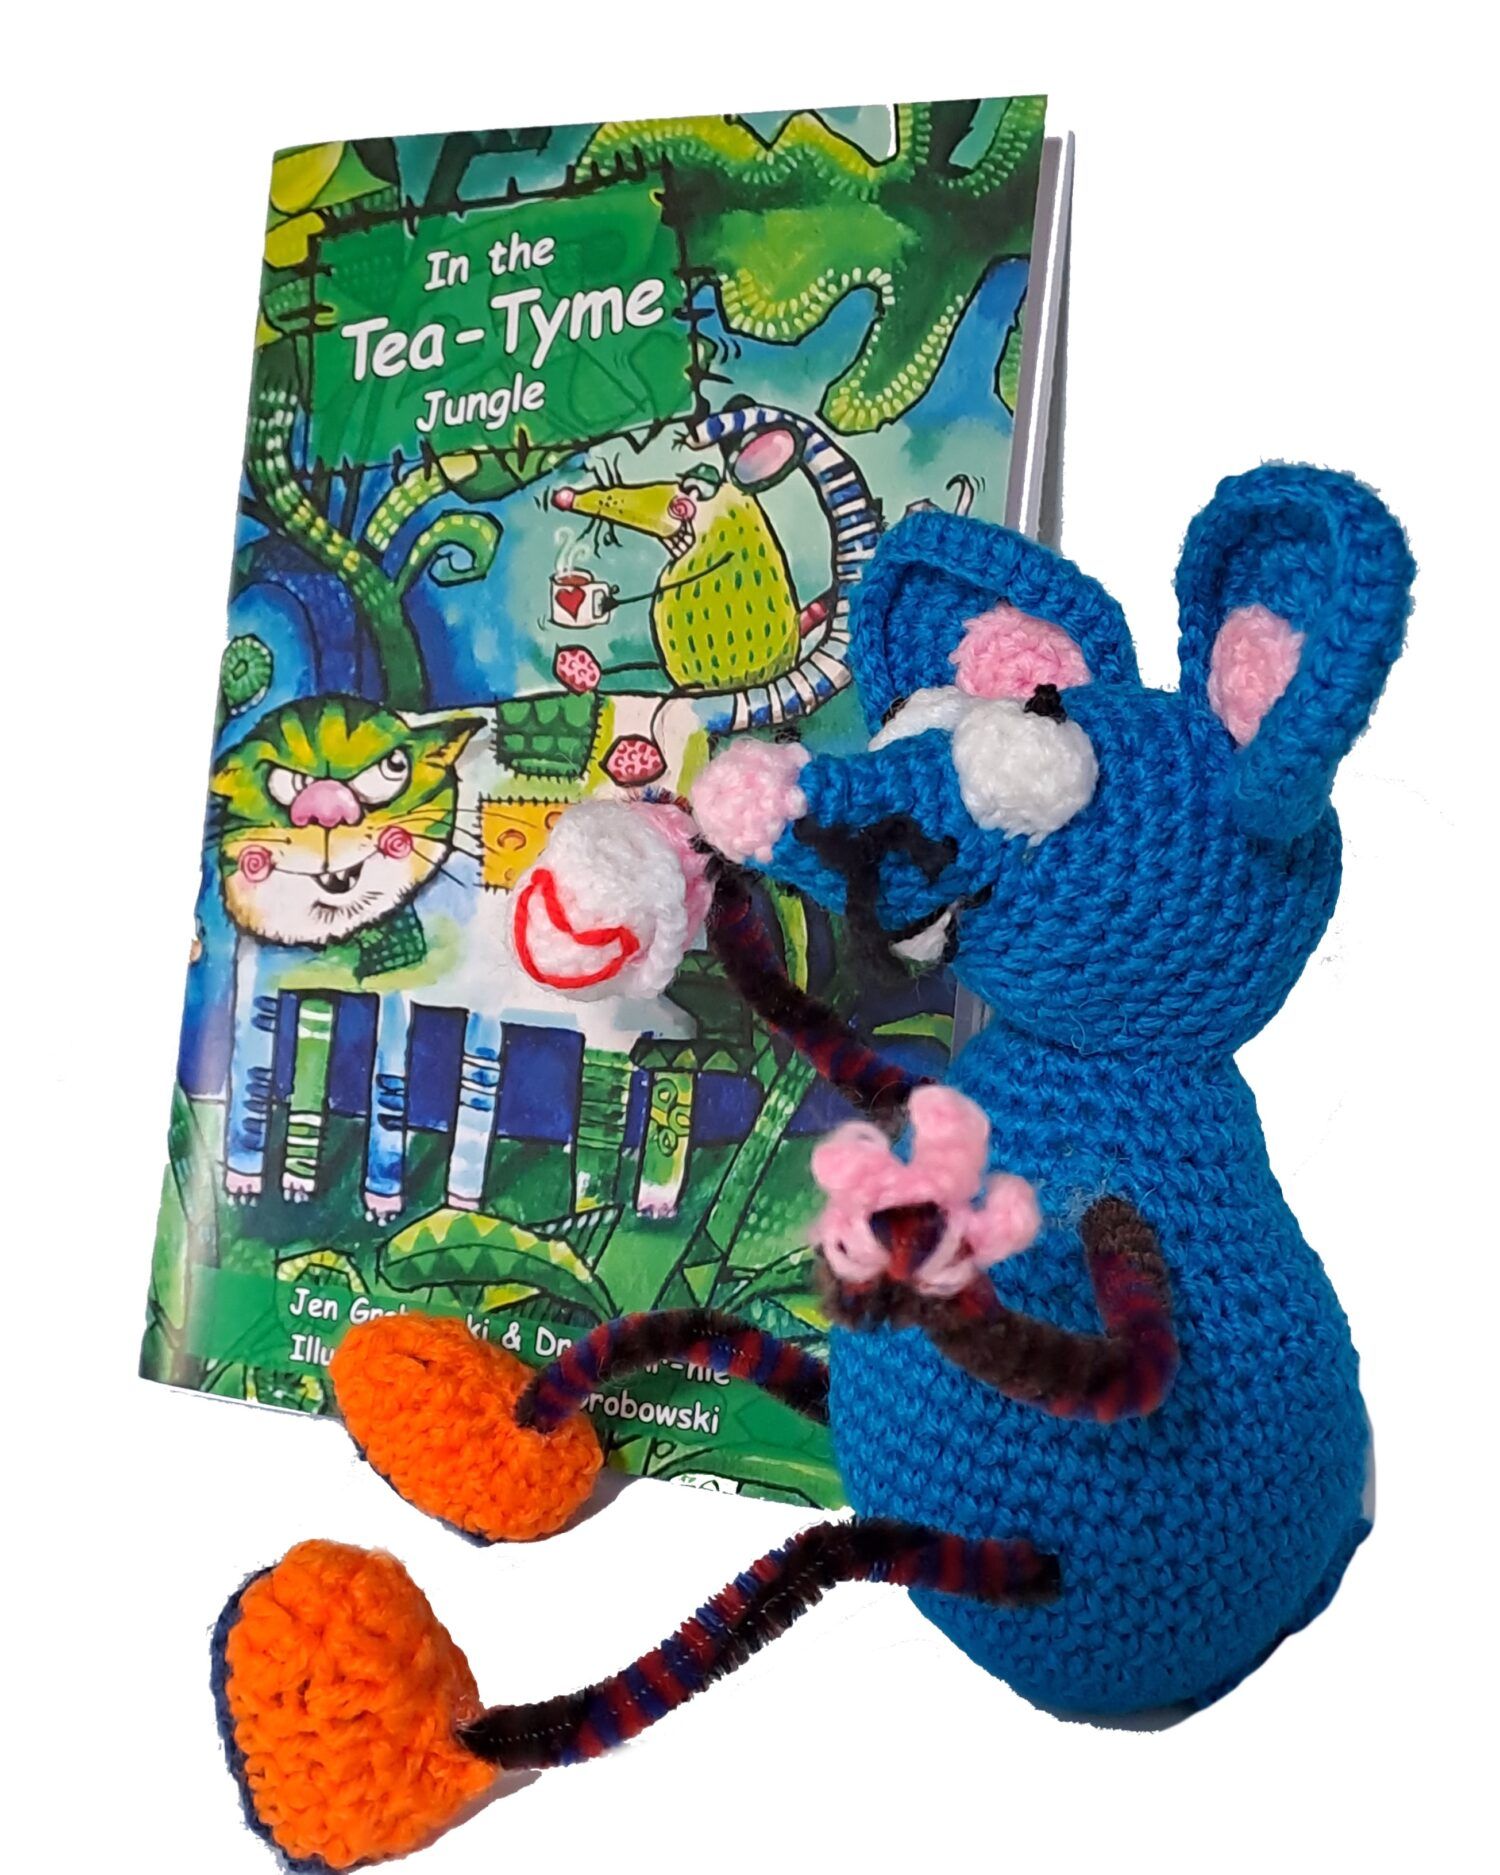 In the Tea-Tyme Jungle Storytale and limited addition + crochet Tjeezie Tea Tyme Mouse by Erratic Tales